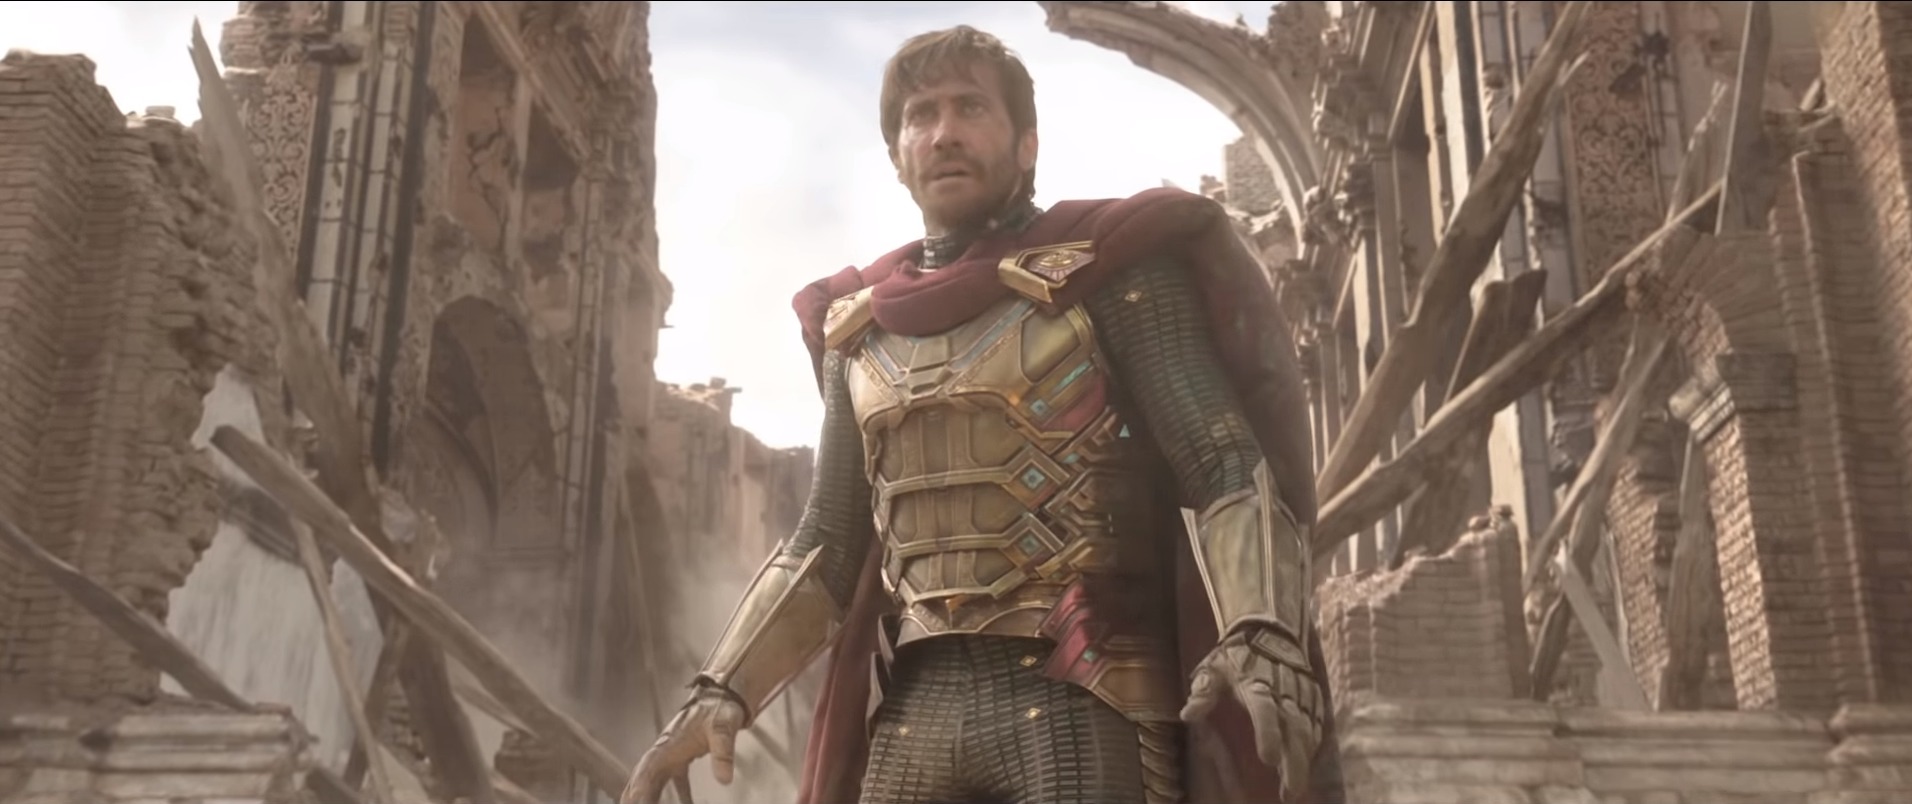 SpiderMan: Far From Home Trailer Unveils The Movie Debut of Mysterio